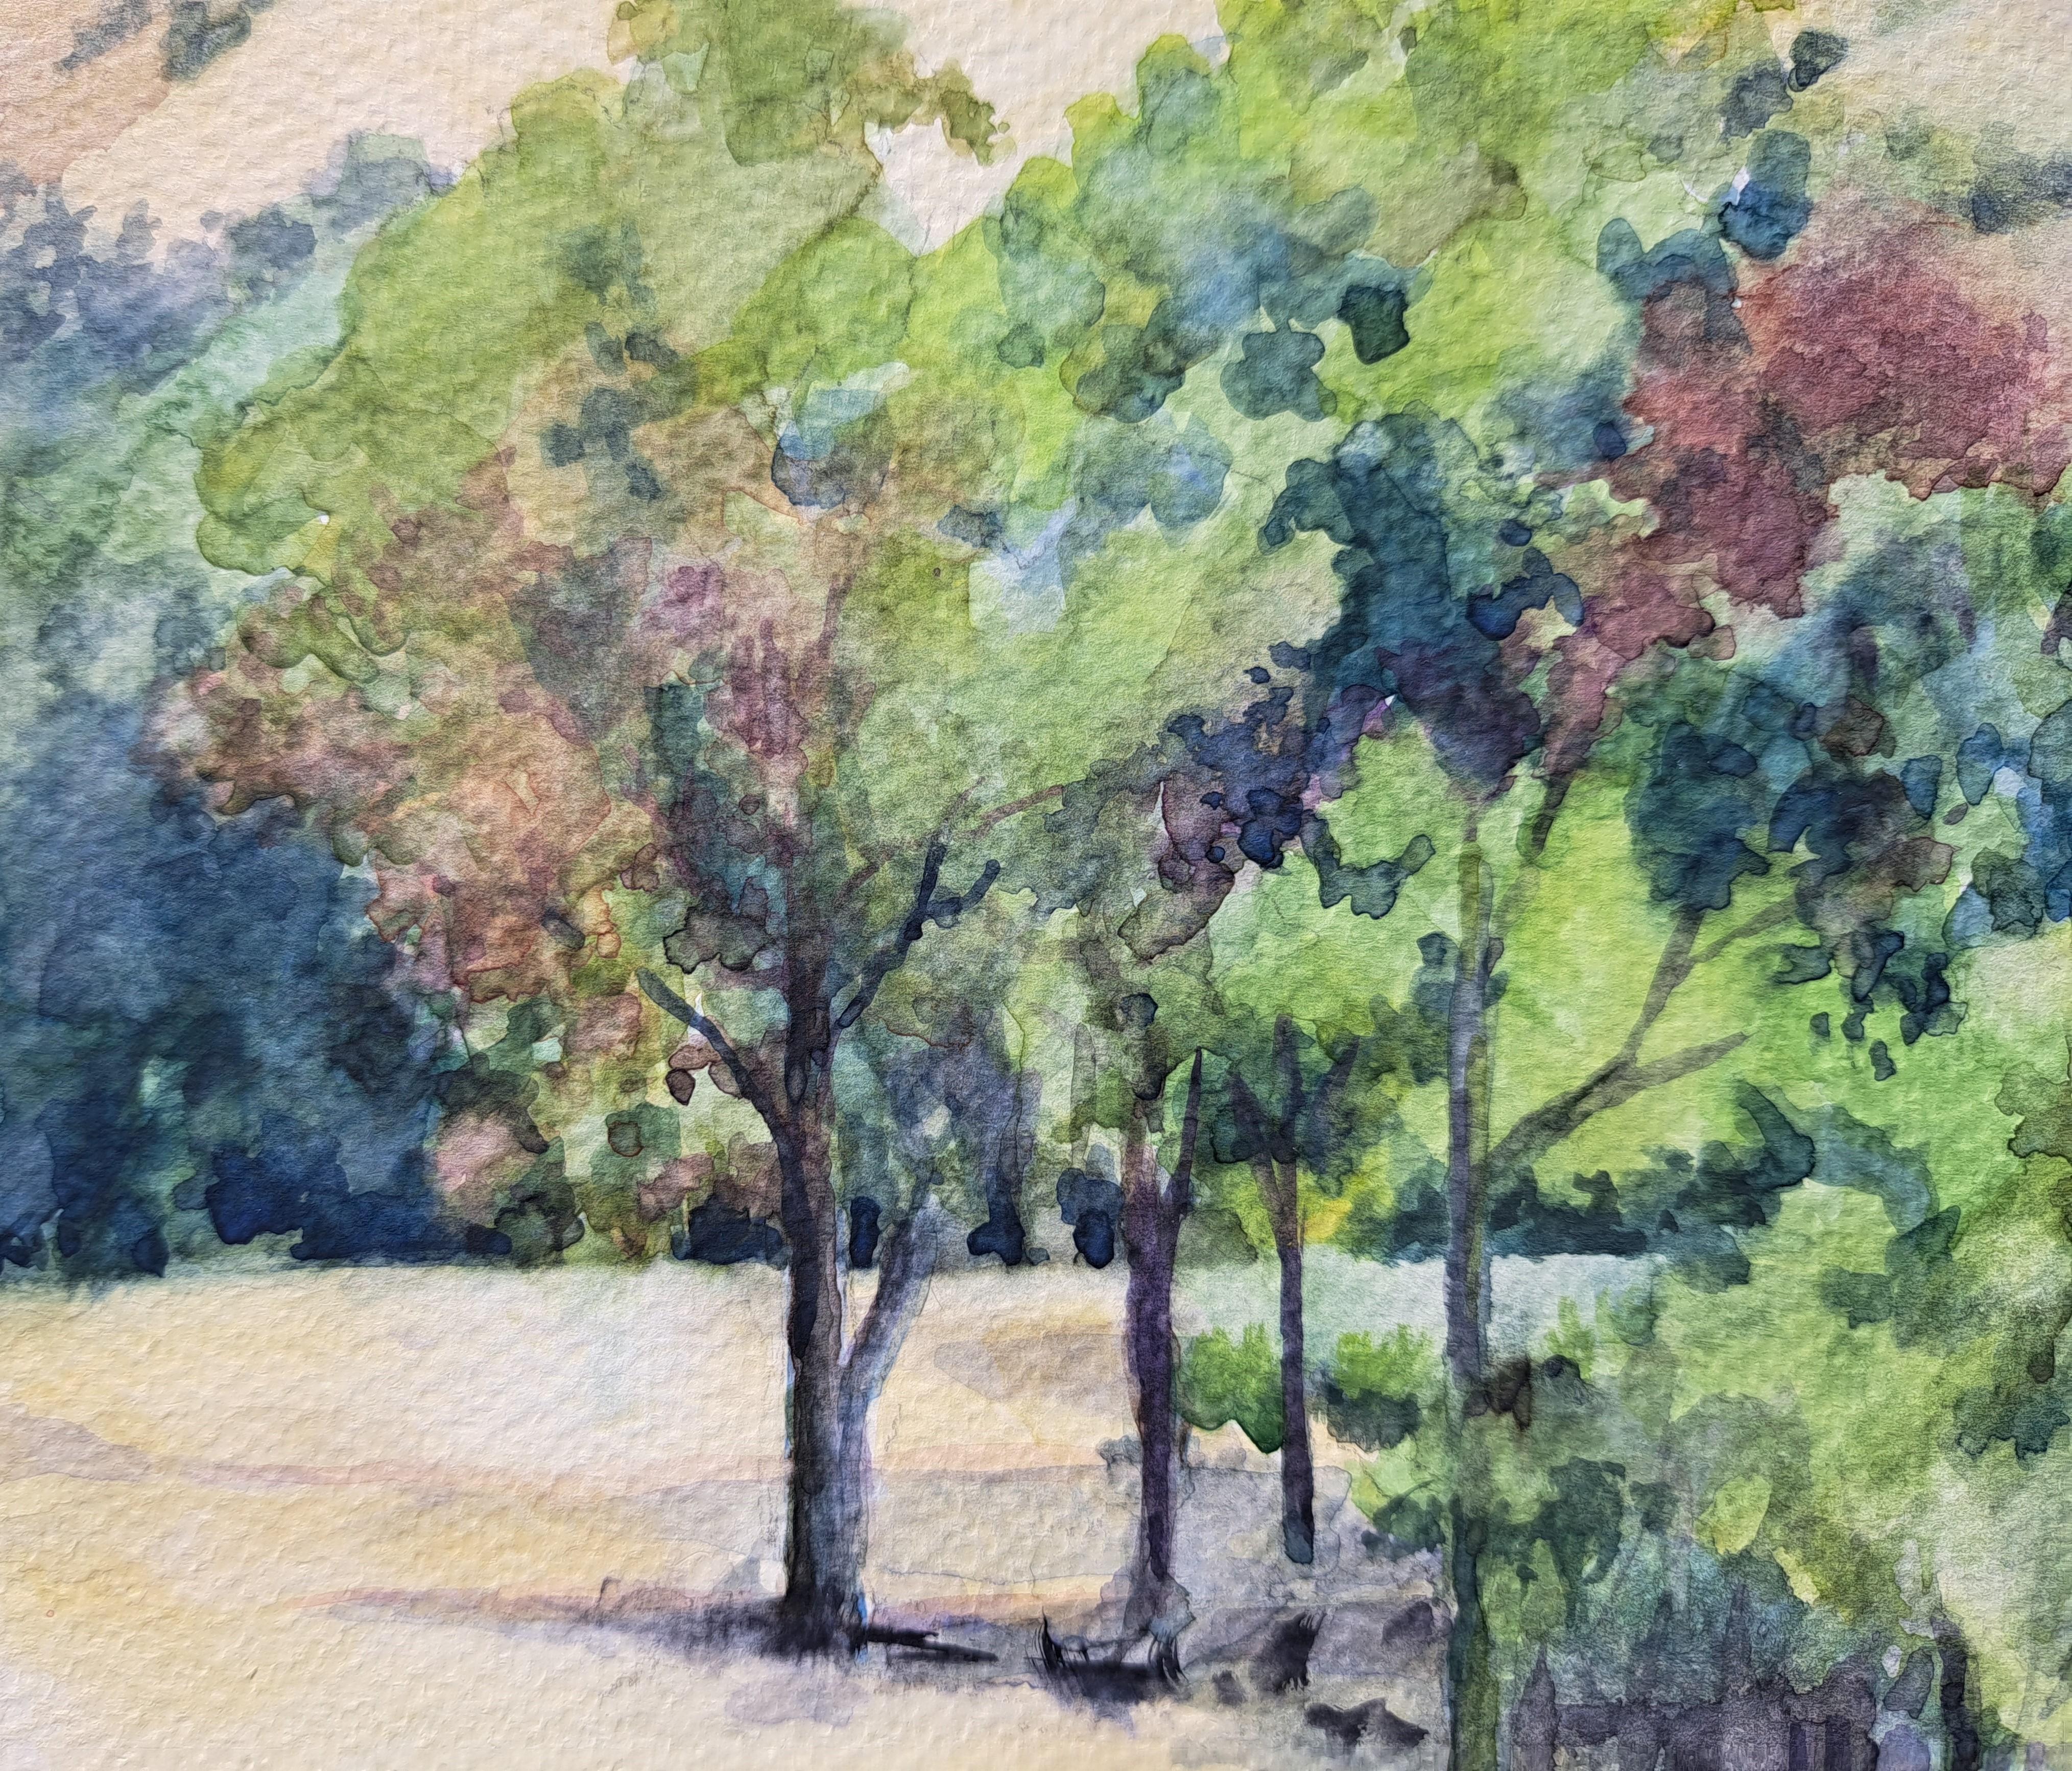 <p>Artist Comments<br>Artist Catherine McCargar exhibits a scenic landscape of Mt. Diablo with an impressionistic style. The dense leaves of the lush trees rustle from the refreshing gusts of mountain air. Catherine notes that the dark parts of the